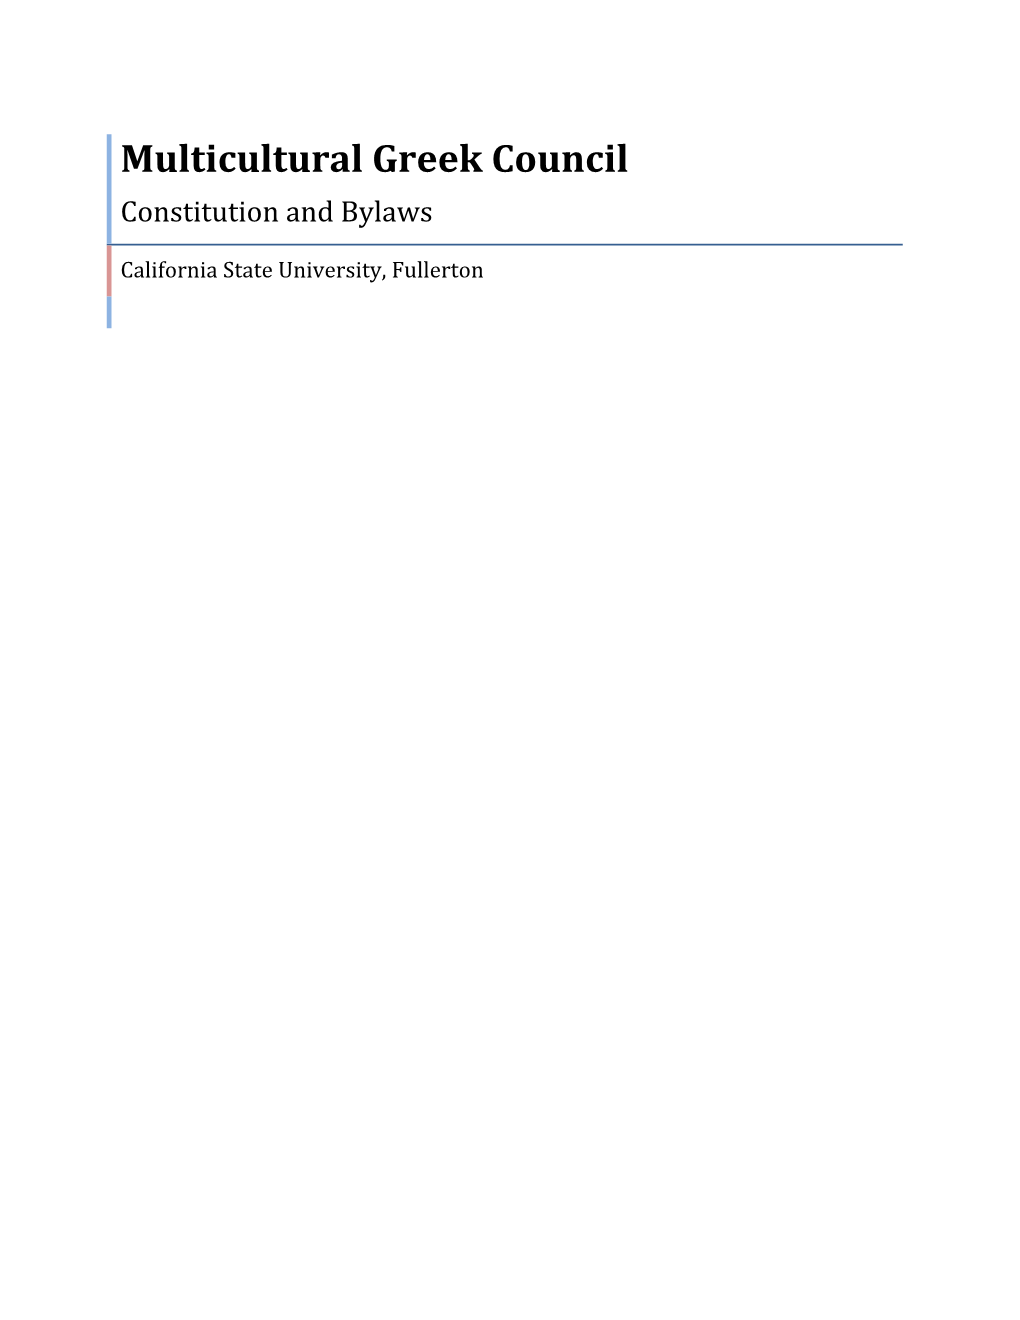 Multicultural Greek Council Constitution and Bylaws